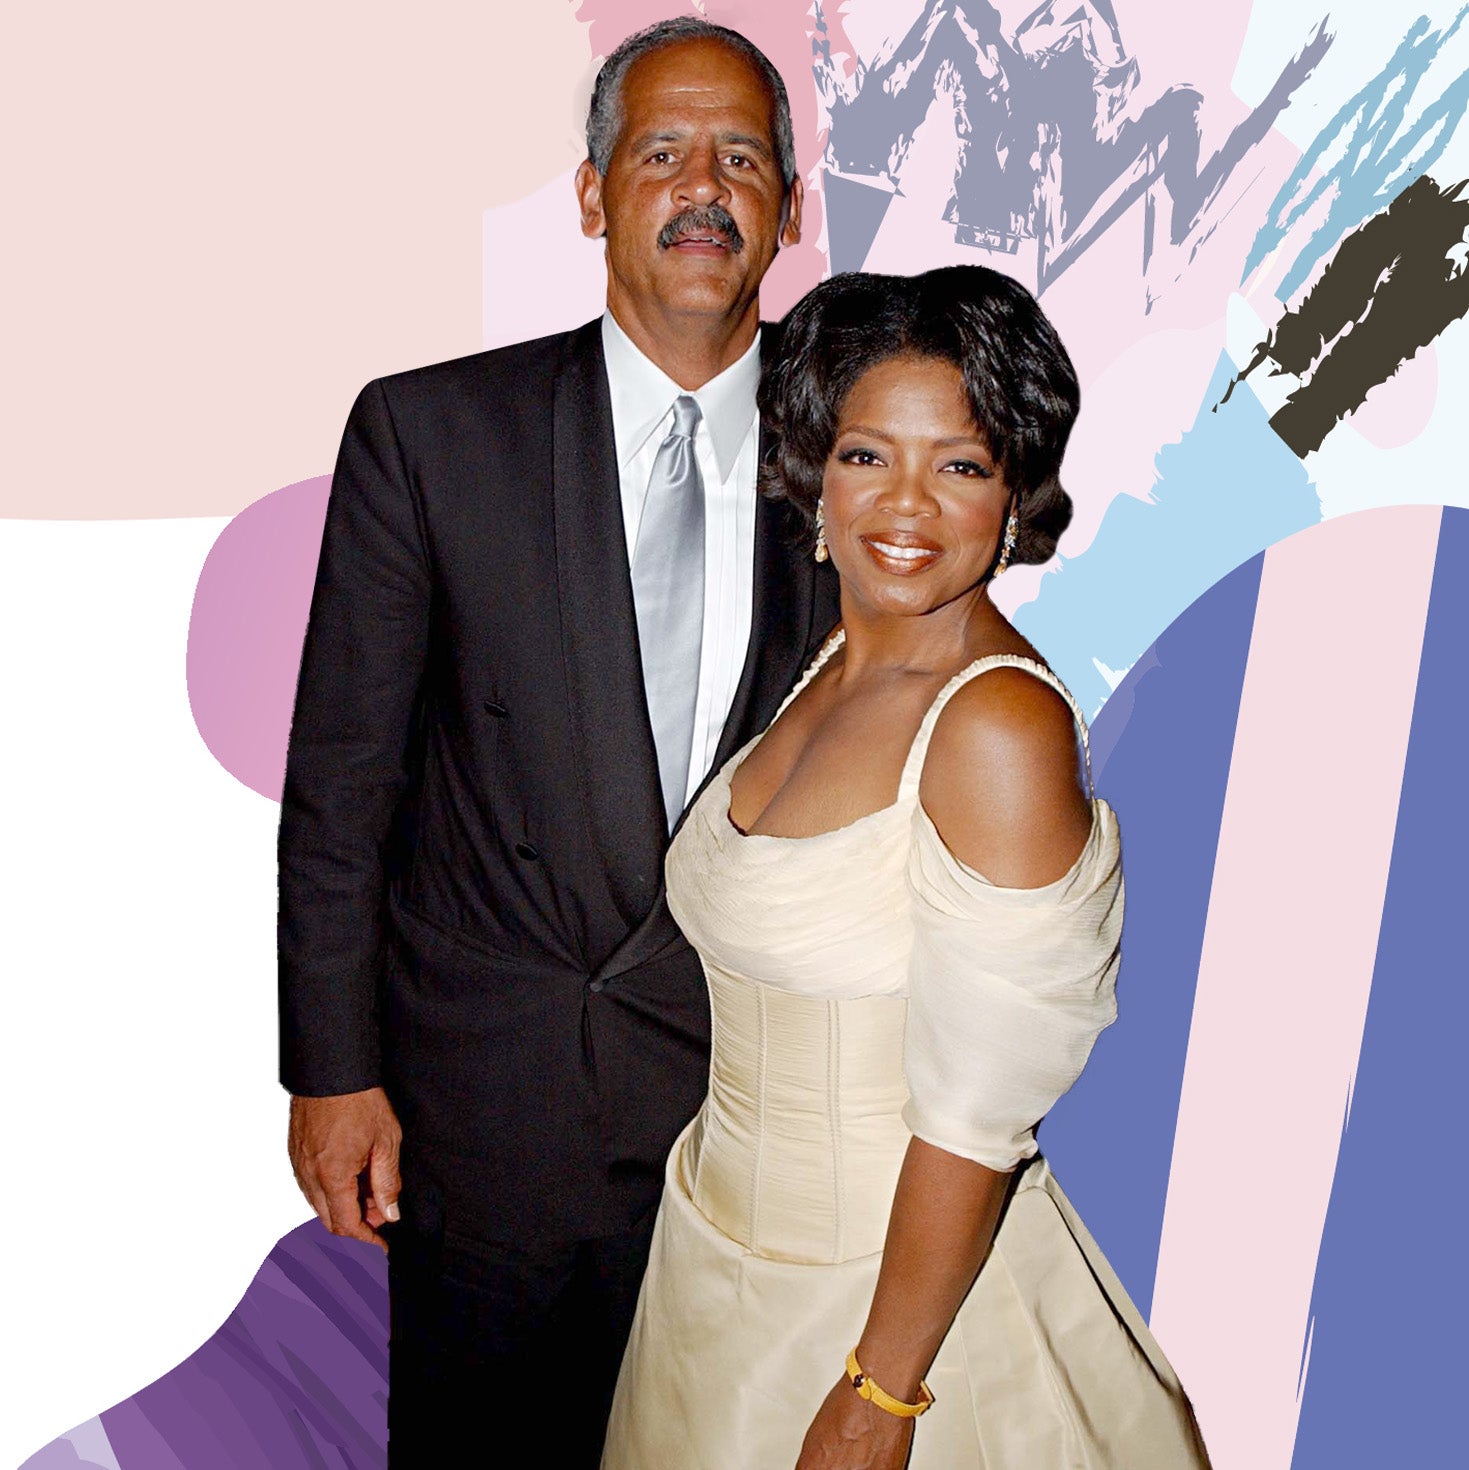 Oprah Opens Up About Why She Is Private About Her And Stedman Graham's Relationship
